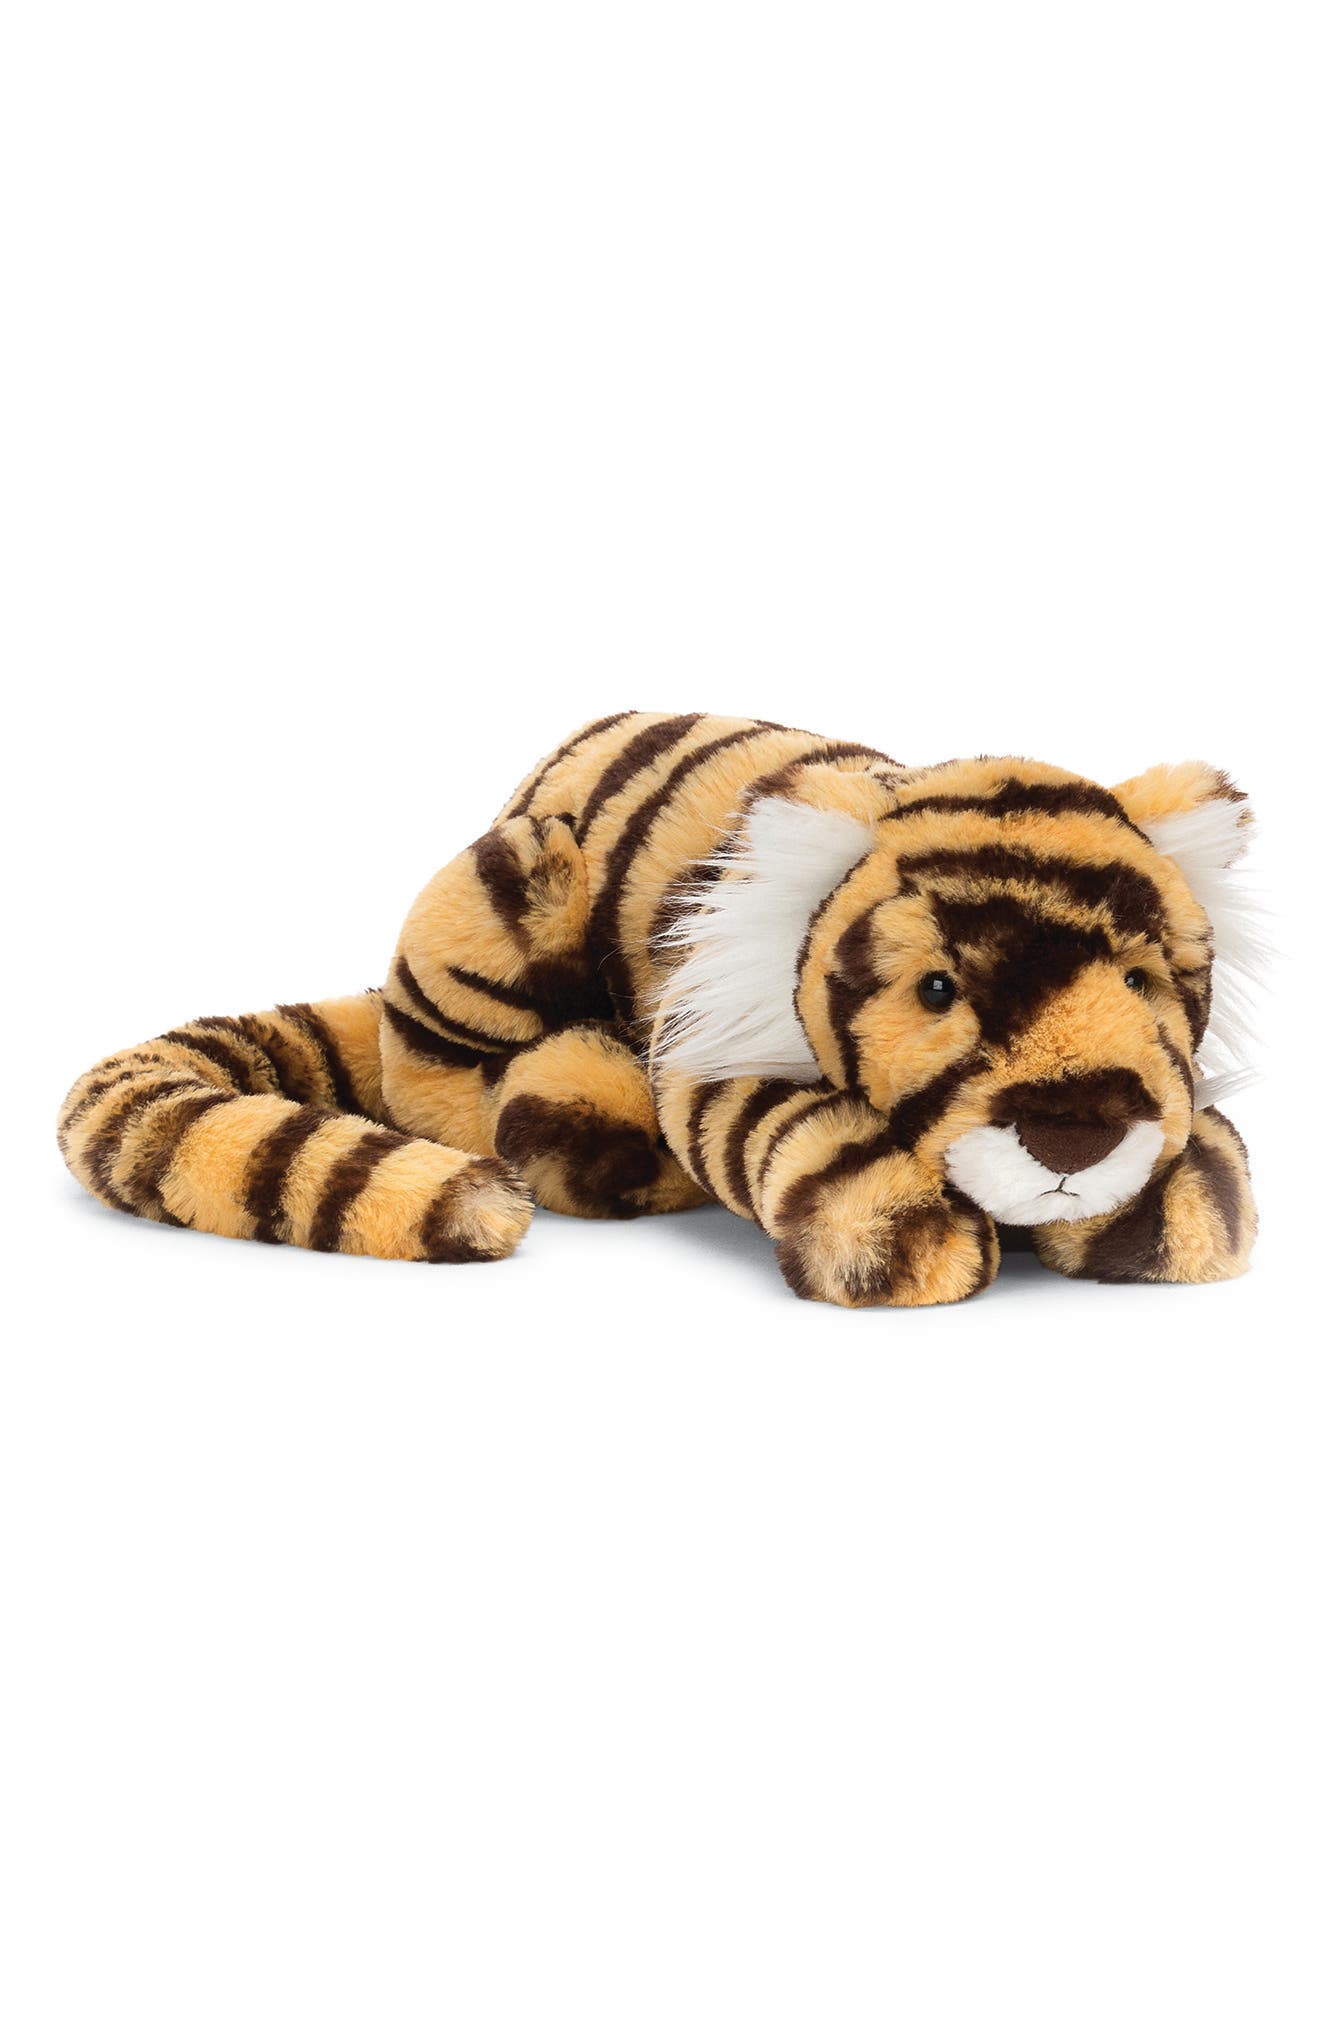 12" The Tiger Who Came To Tea Hand Puppet Aurora Toy Soft New Plush Cuddly 